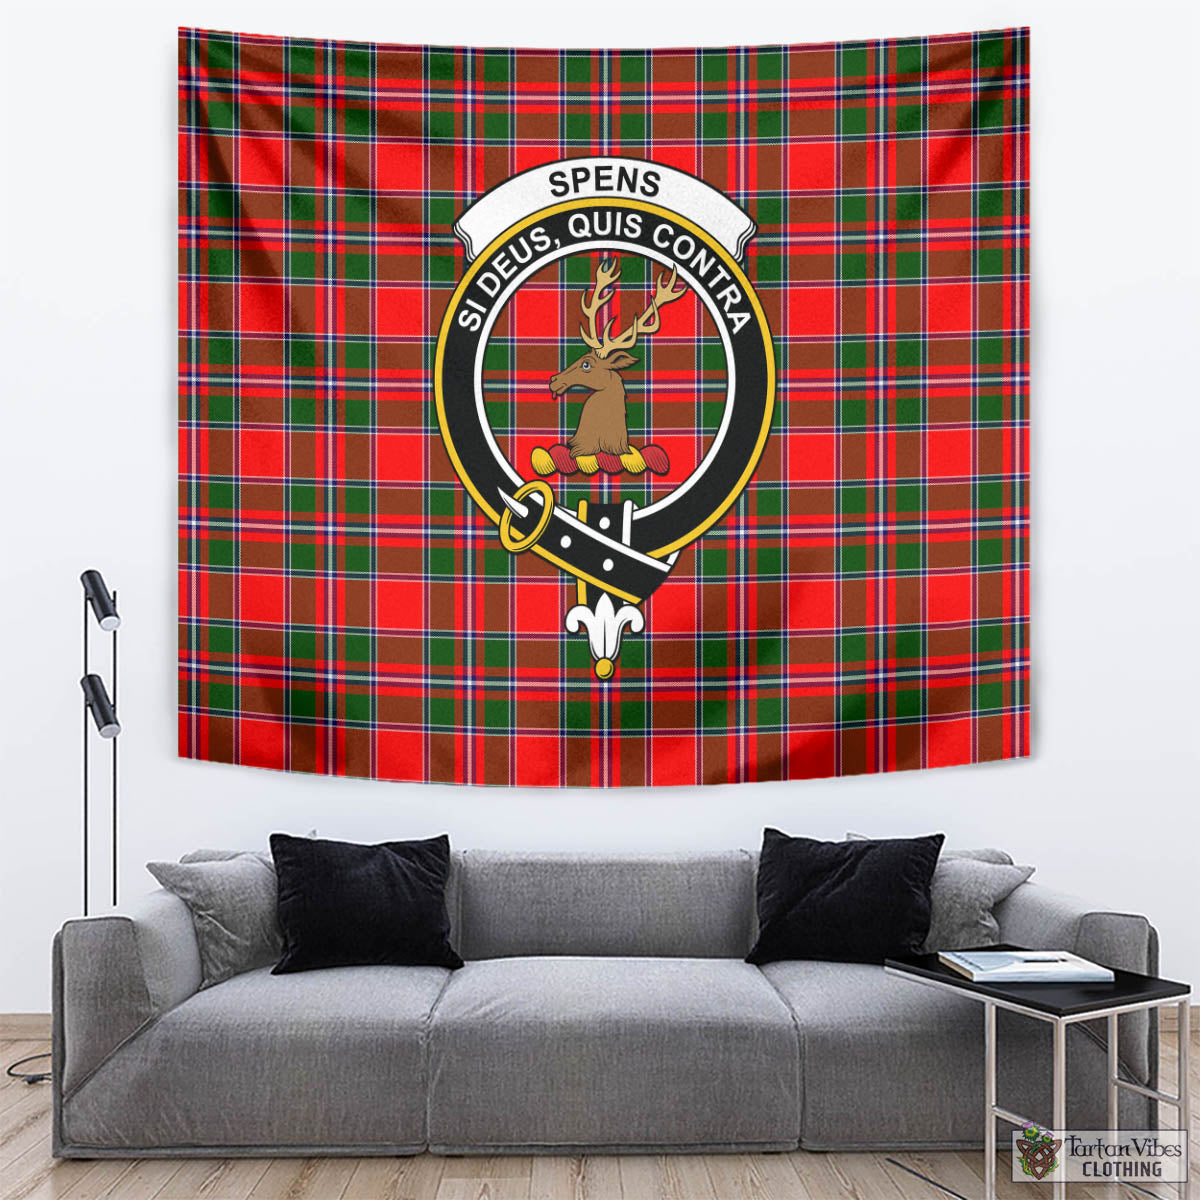 Tartan Vibes Clothing Spens Modern Tartan Tapestry Wall Hanging and Home Decor for Room with Family Crest